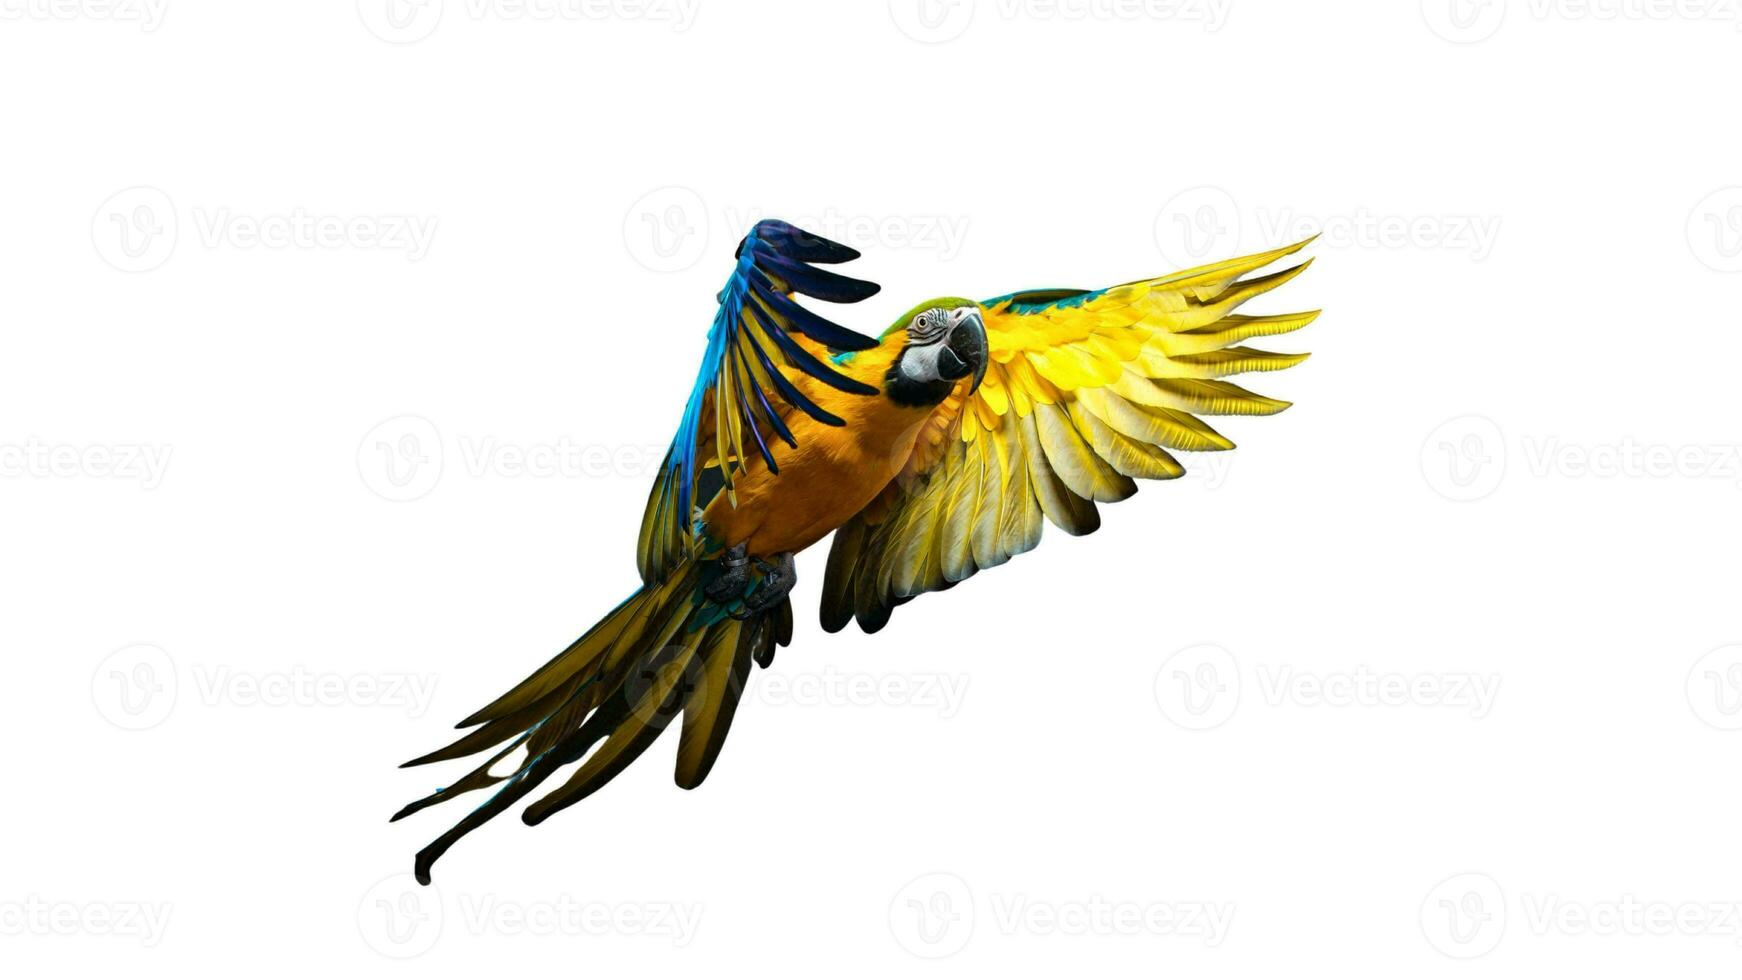 Colorful Parrot Macaw, Exotic Tropical Bird with Vibrant Plumage, Isolated on Empty Background photo